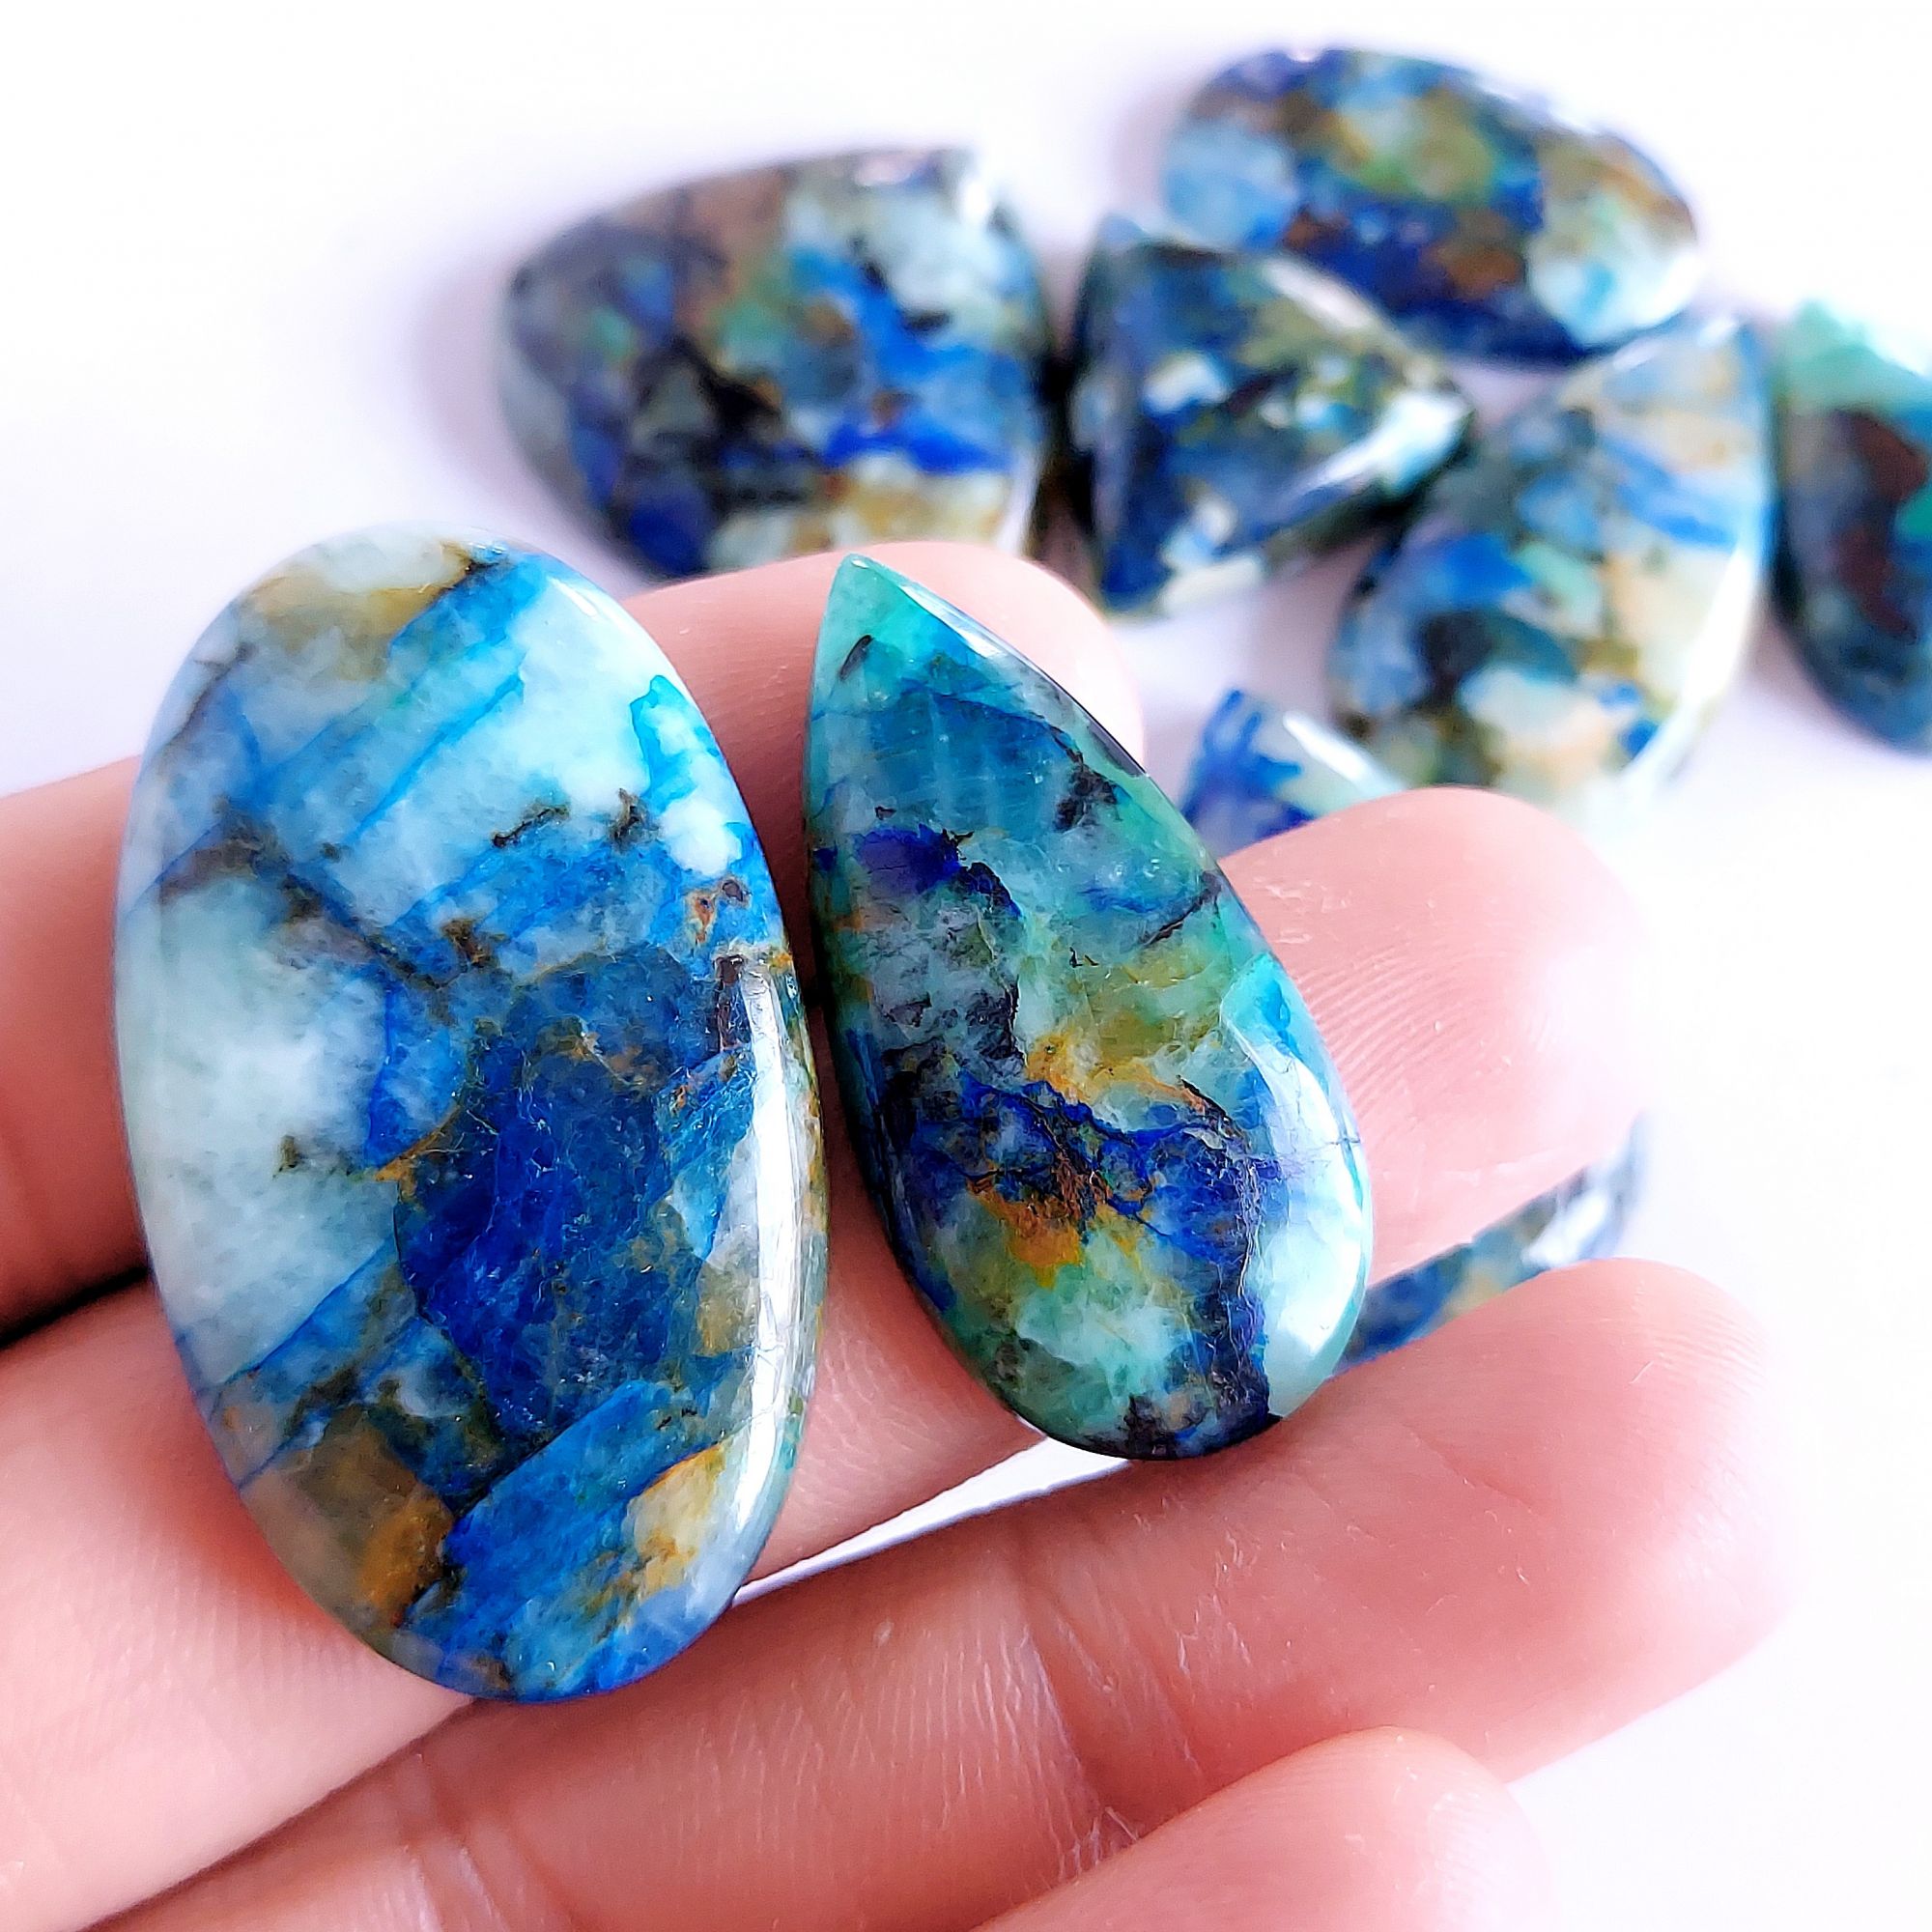 297.Cts 9 Pcs Natural Smooth Azurite Mix Loose Gemstone Cabochon Lot Size 40x24 27x19mm Wholesale Gemstone For jewelry